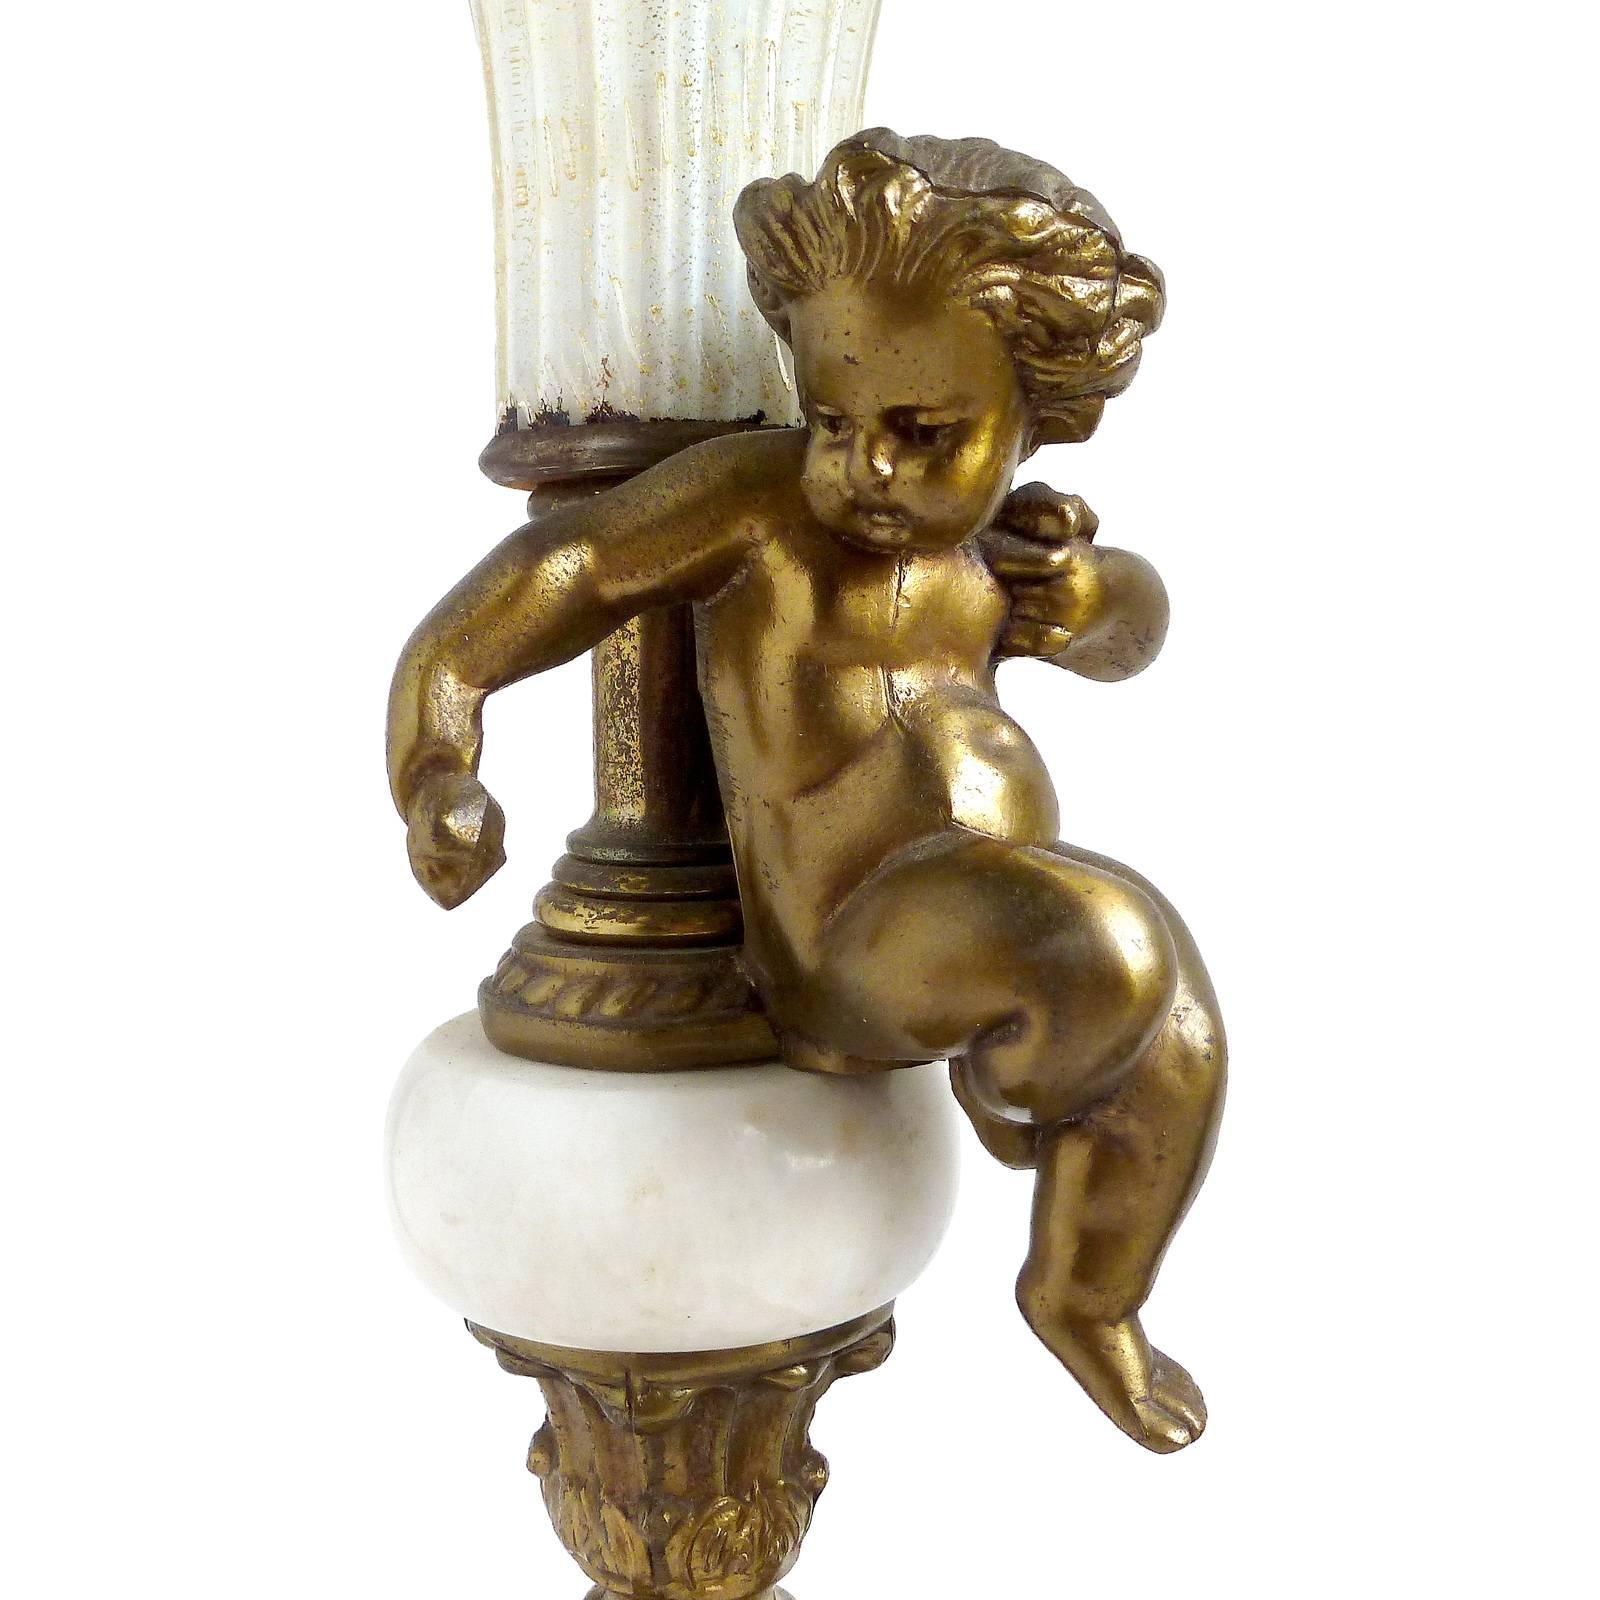 Beautiful decorative cherub lamps, with marble disk, and Murano white gold flecks and bubbles art glass shades. The brass cast metal bases are marked L & L (Loevsky & Loevsky) with number 8238 on each of them. The shades have a ribbed design